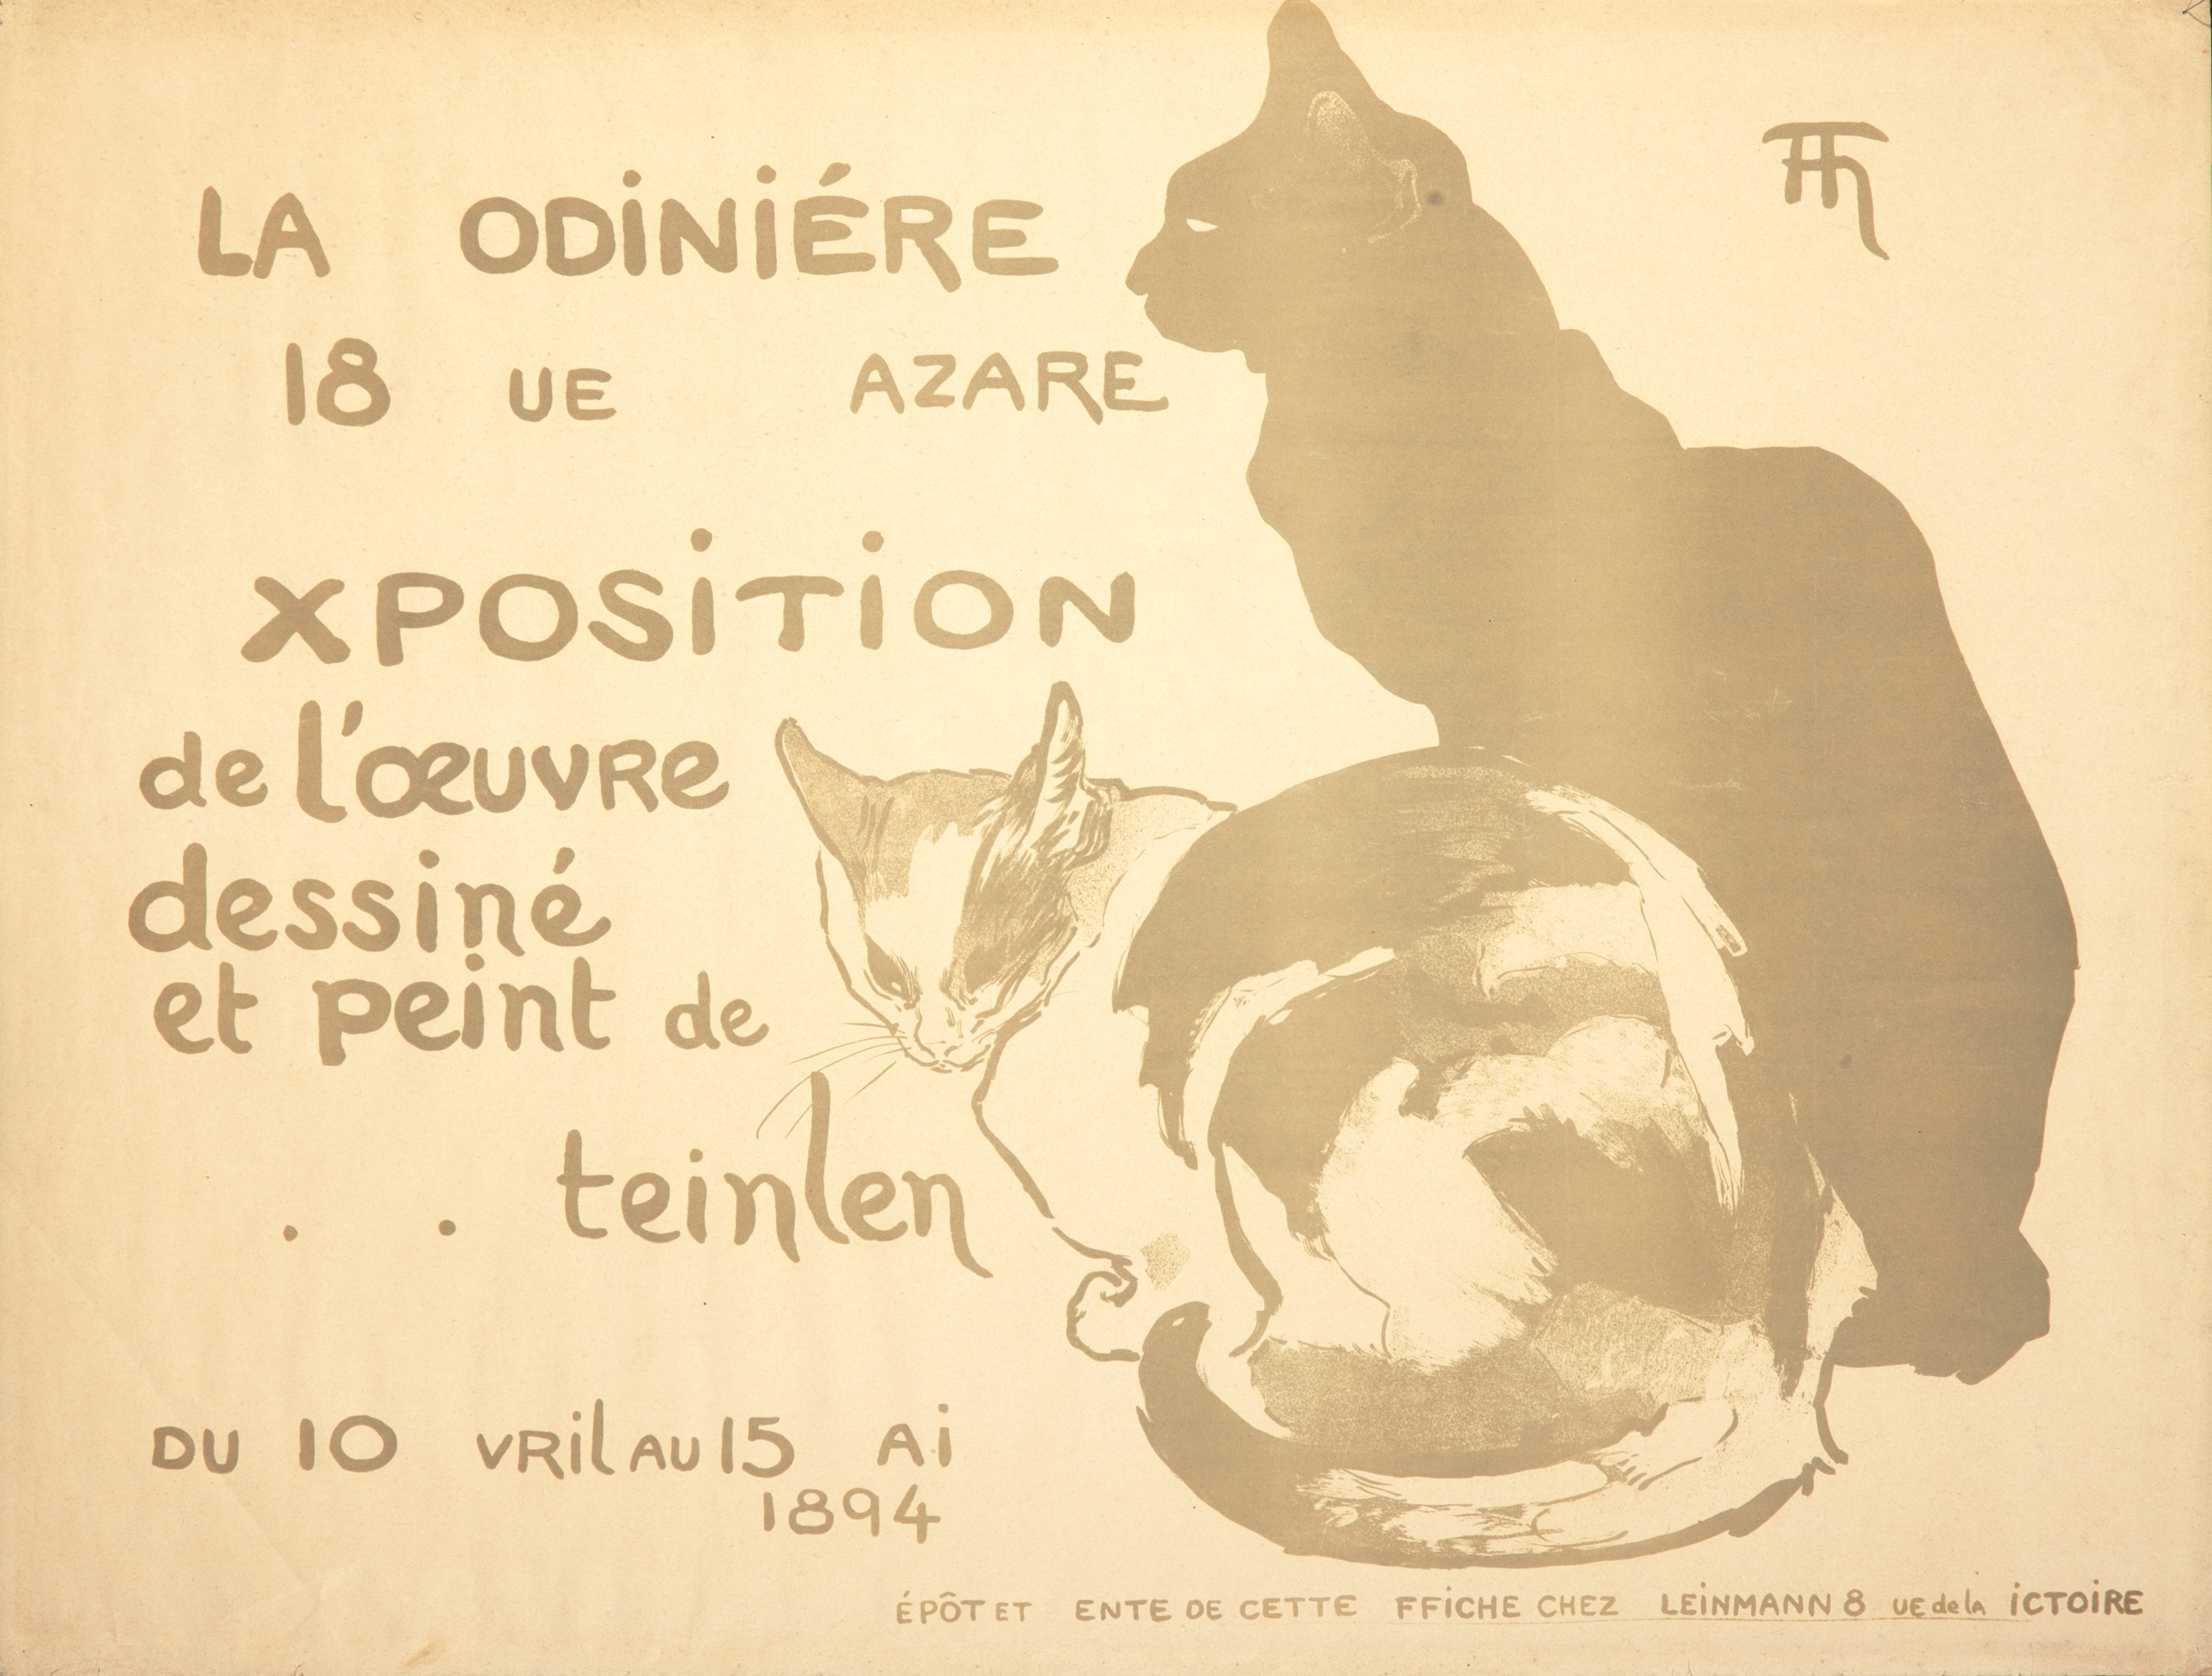 A progressive print of the 1894 Théophile-Alexandre Steinlen poster, advertising his first gallery show. It focuses on the gray areas of the image.